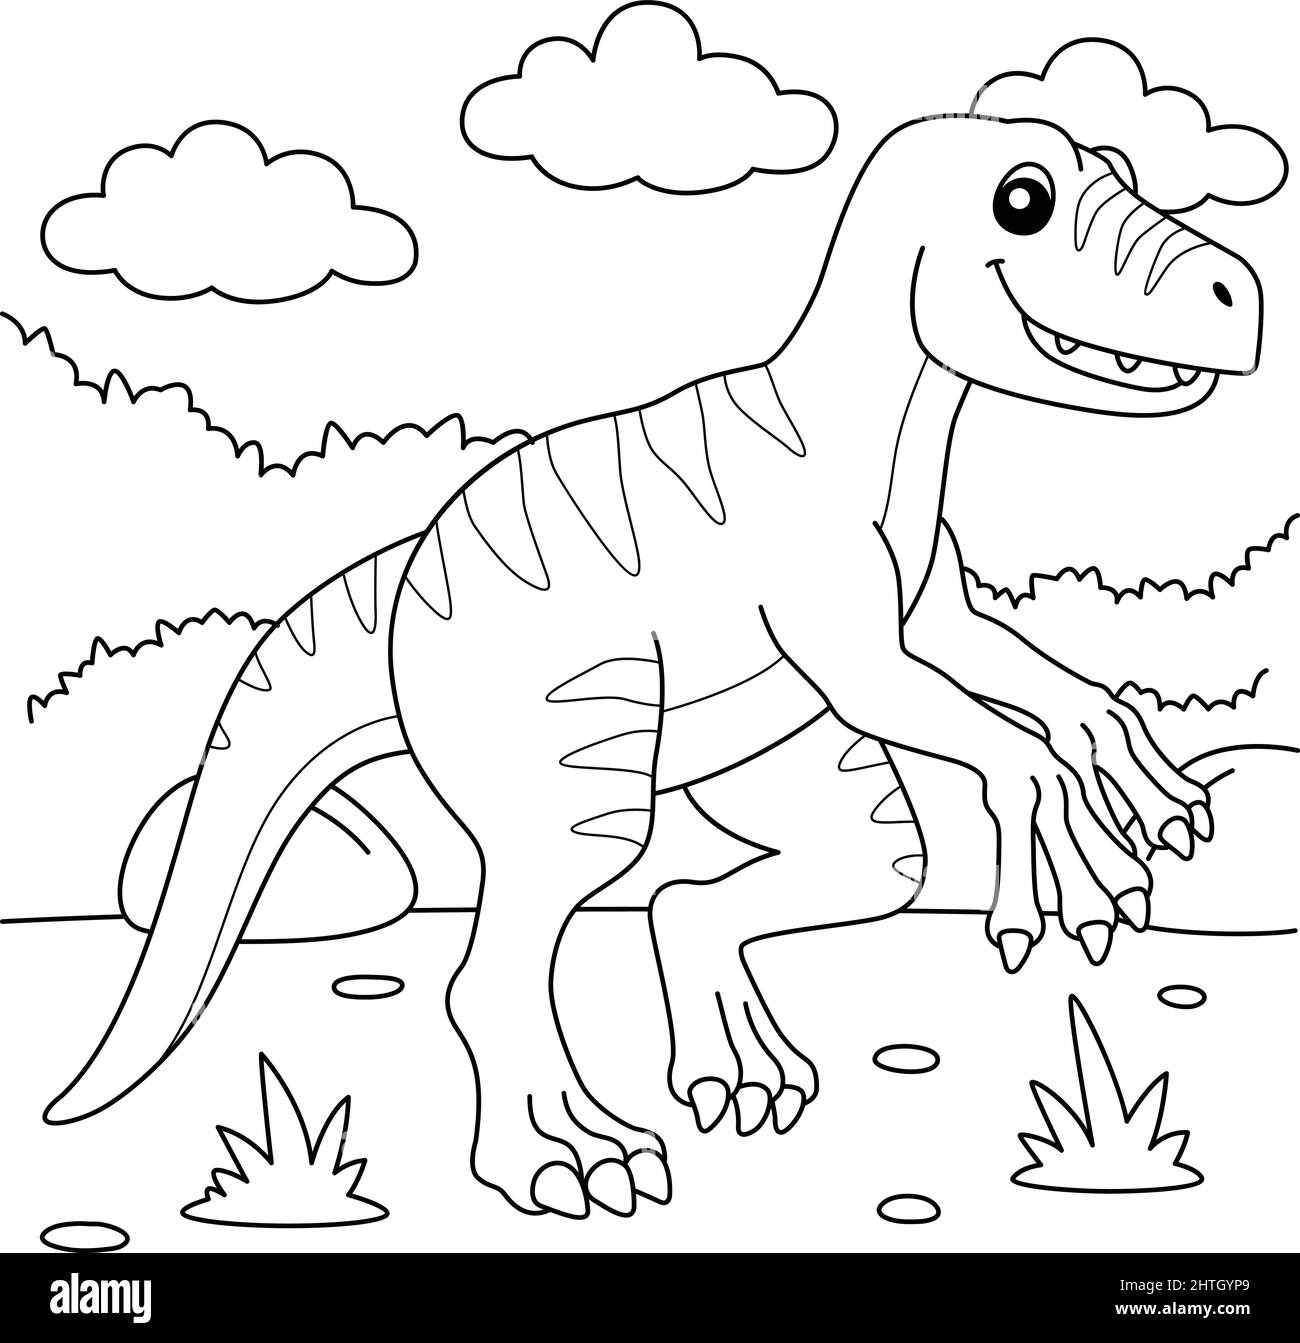 Dino Coloring Page High Resolution Stock Photography and Images ...